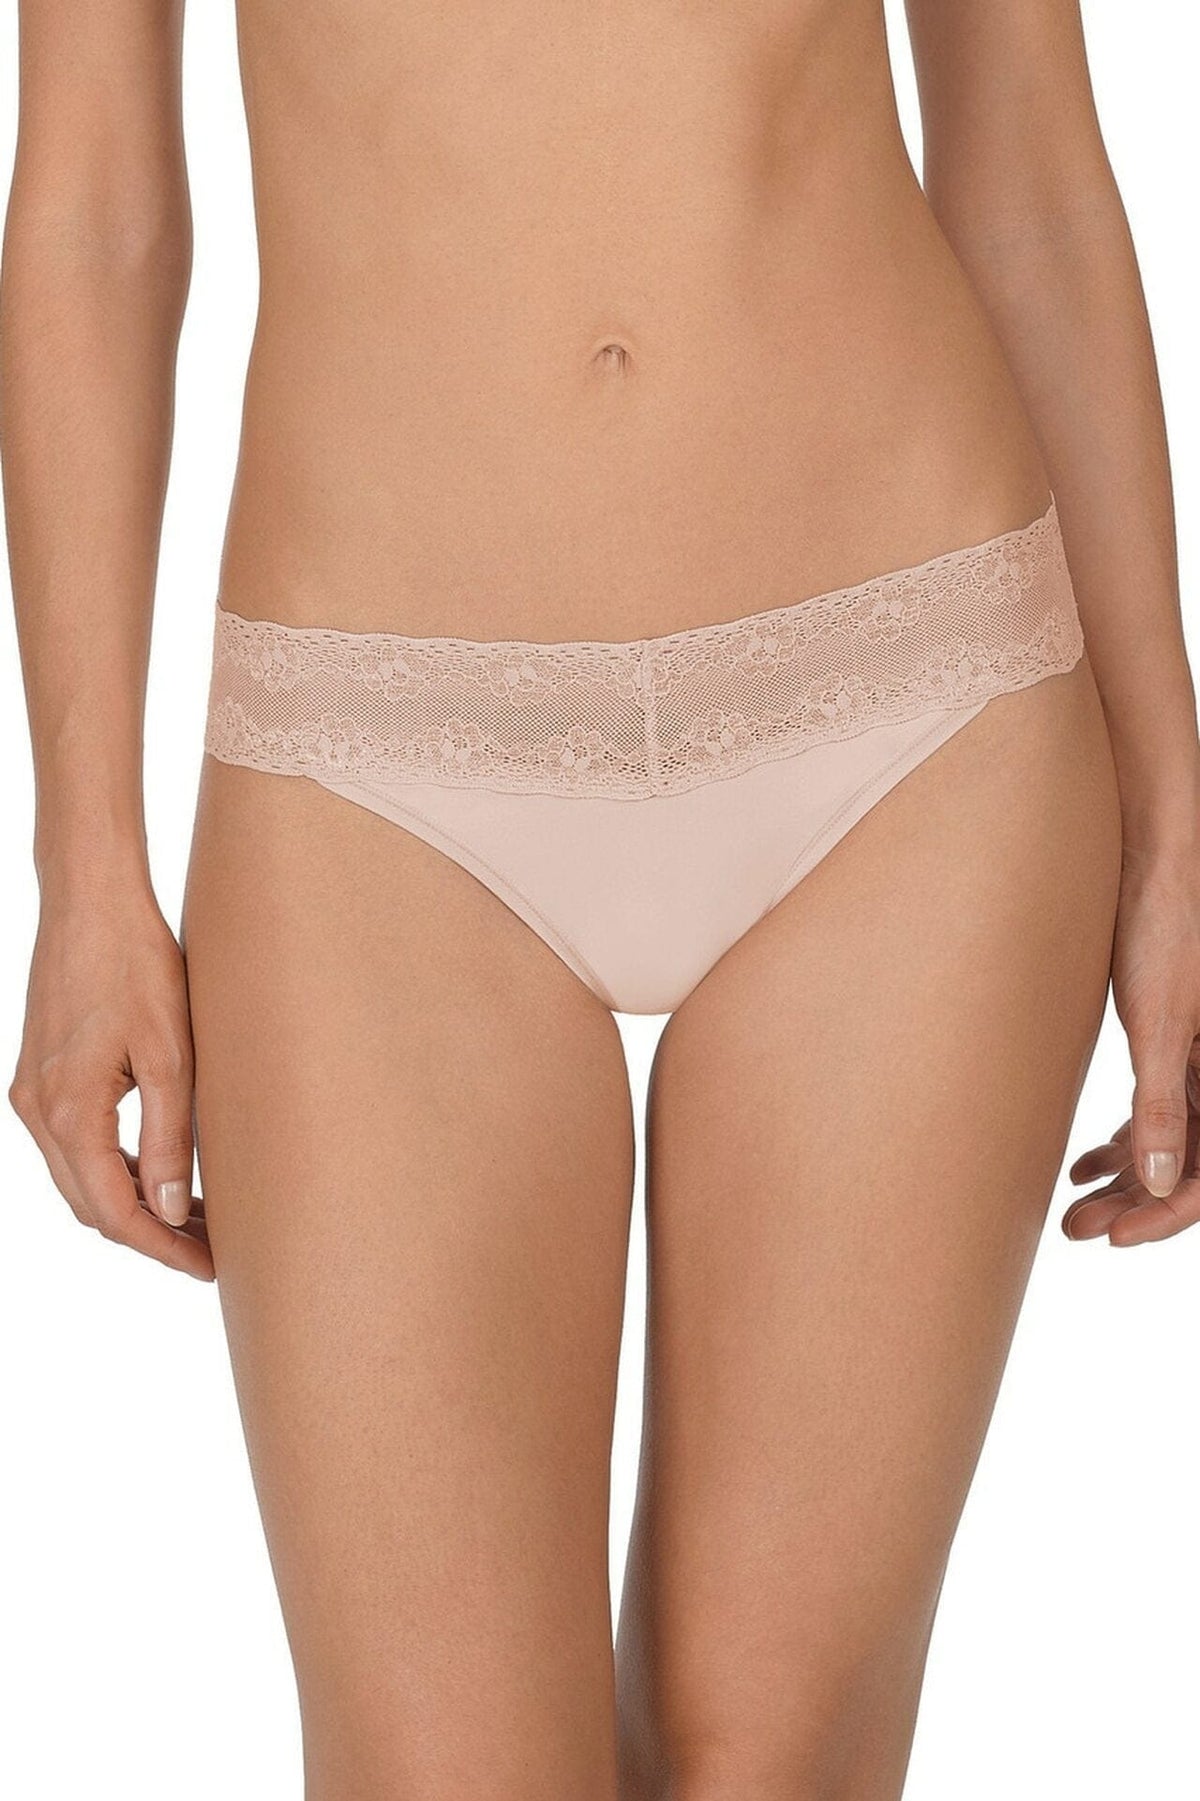 Natori Thongs Cameo Rose / O/S Bliss Perfection One Size Thong - Cameo Rose